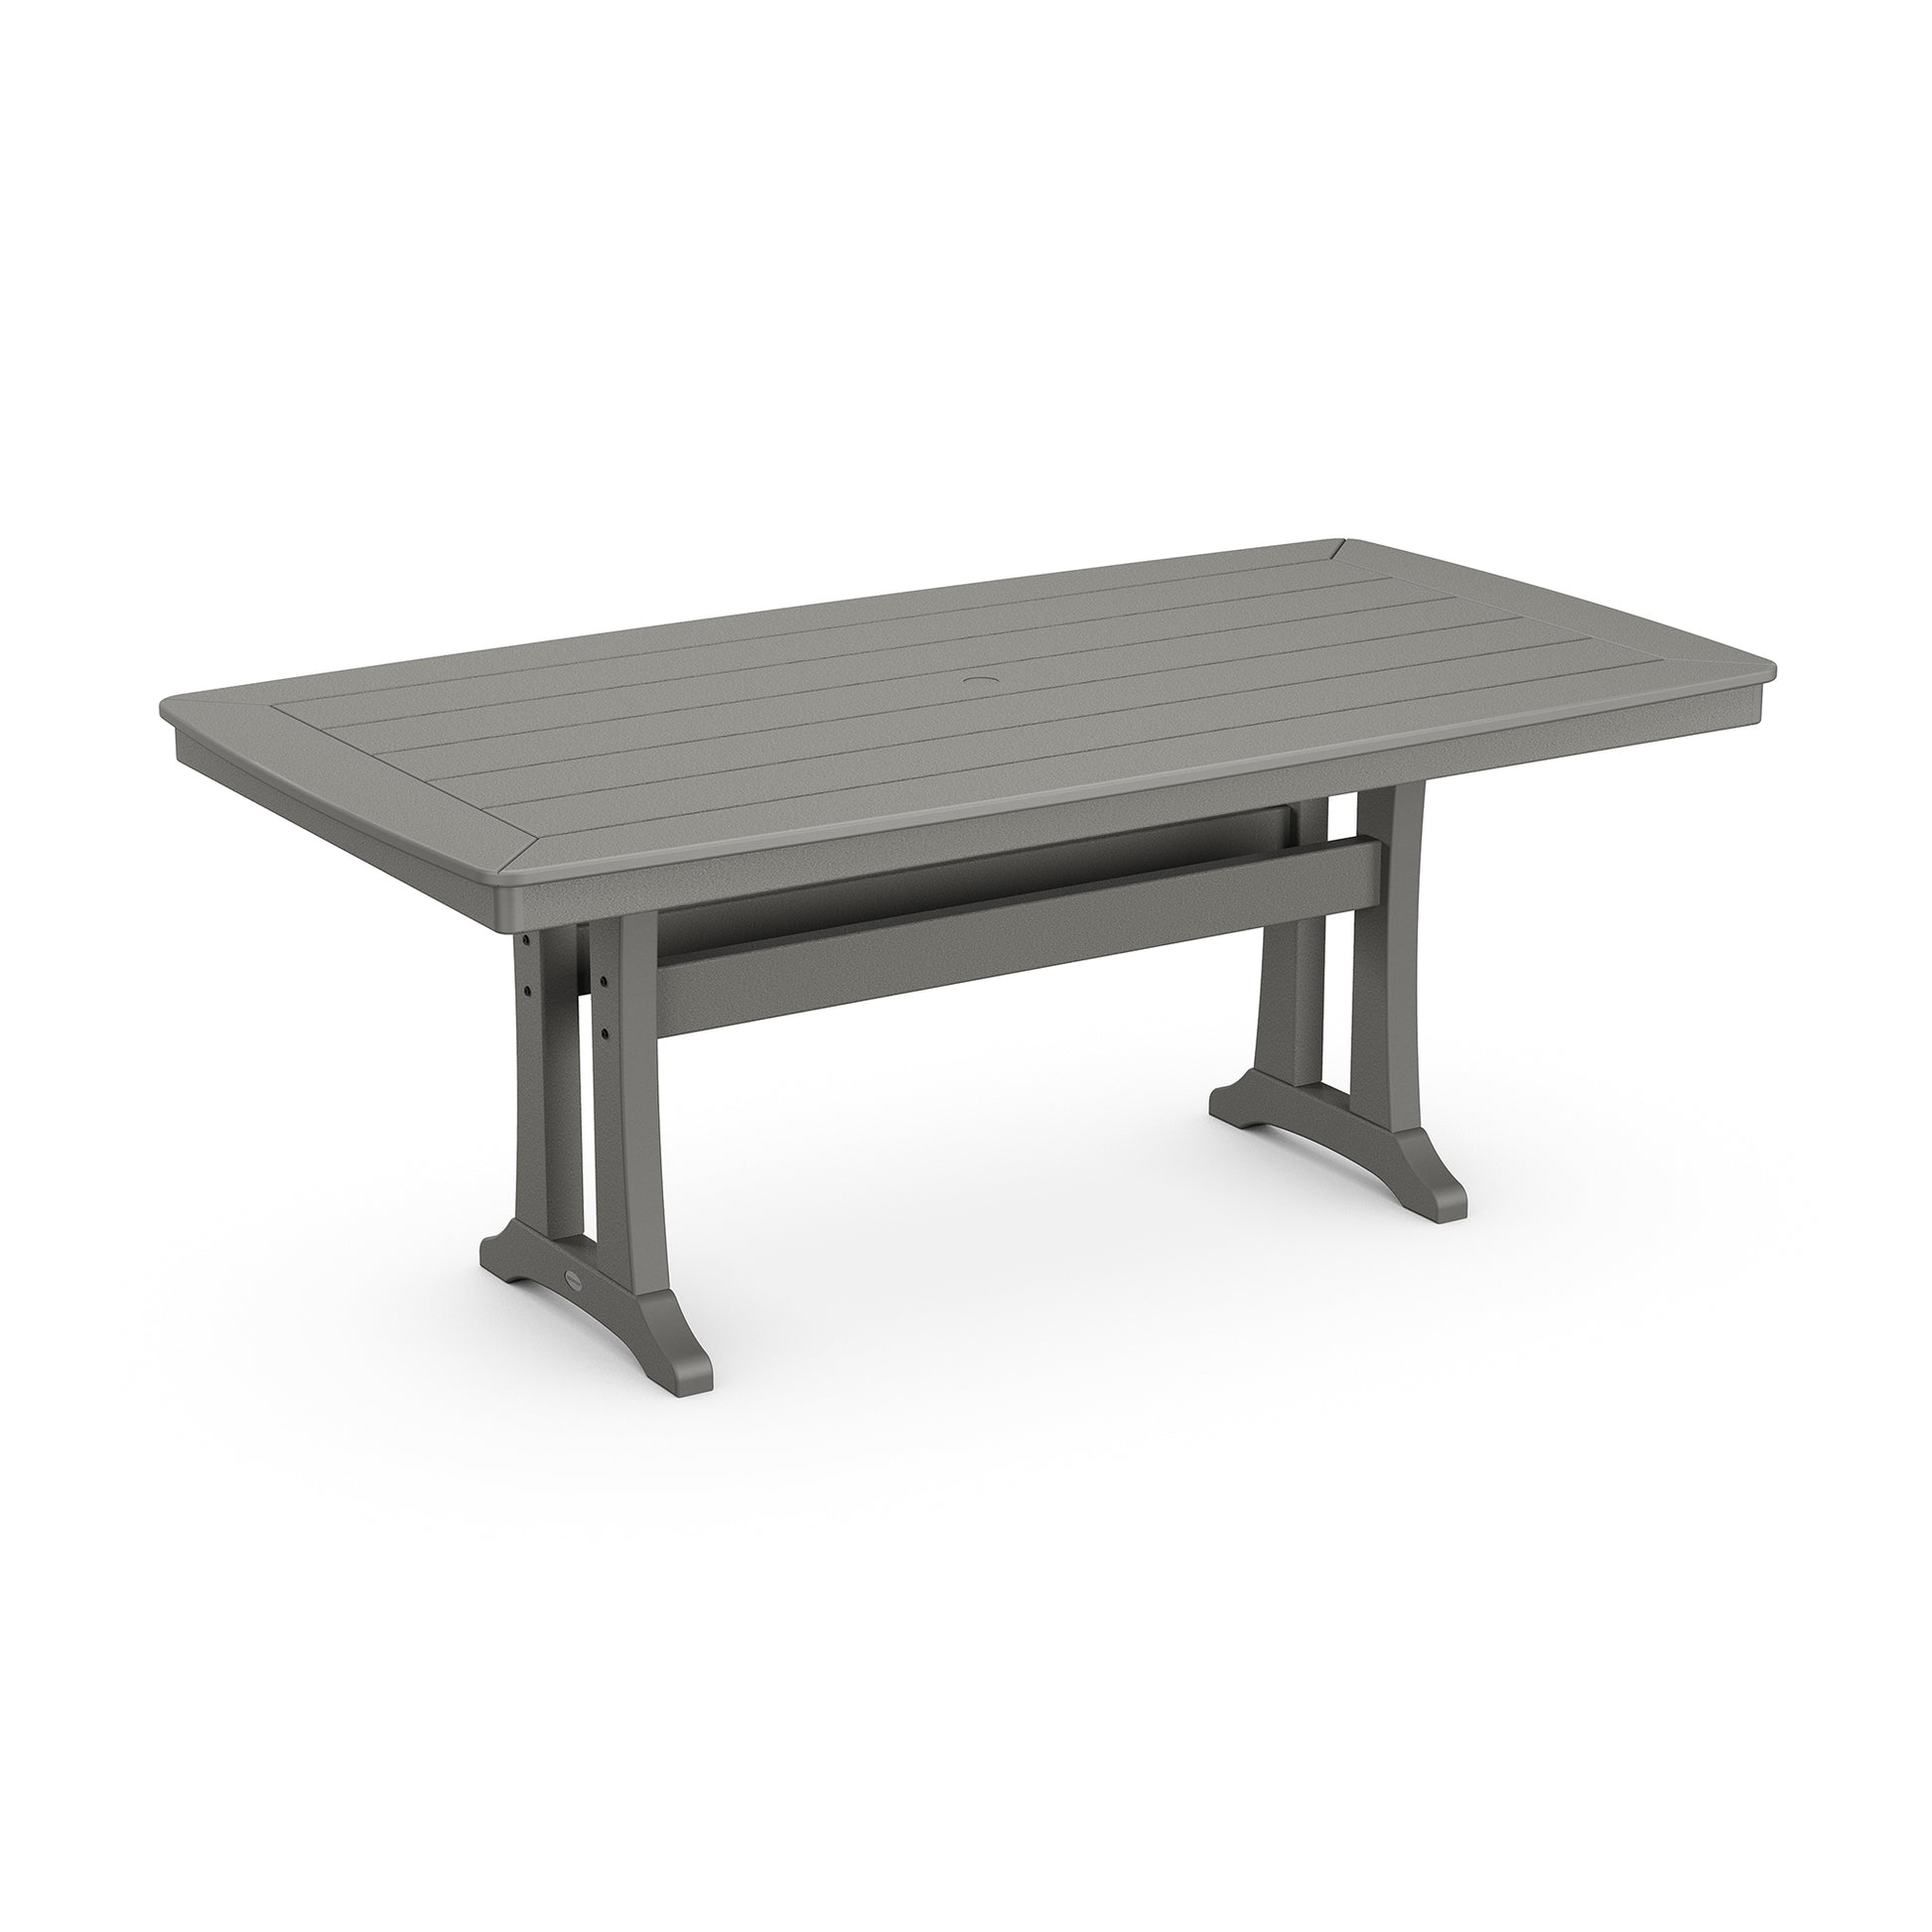 A rectangular, gray POLYWOOD Nautical Trestle 38" x 73" dining table with slatted top design and sturdy metal legs on a plain white background.